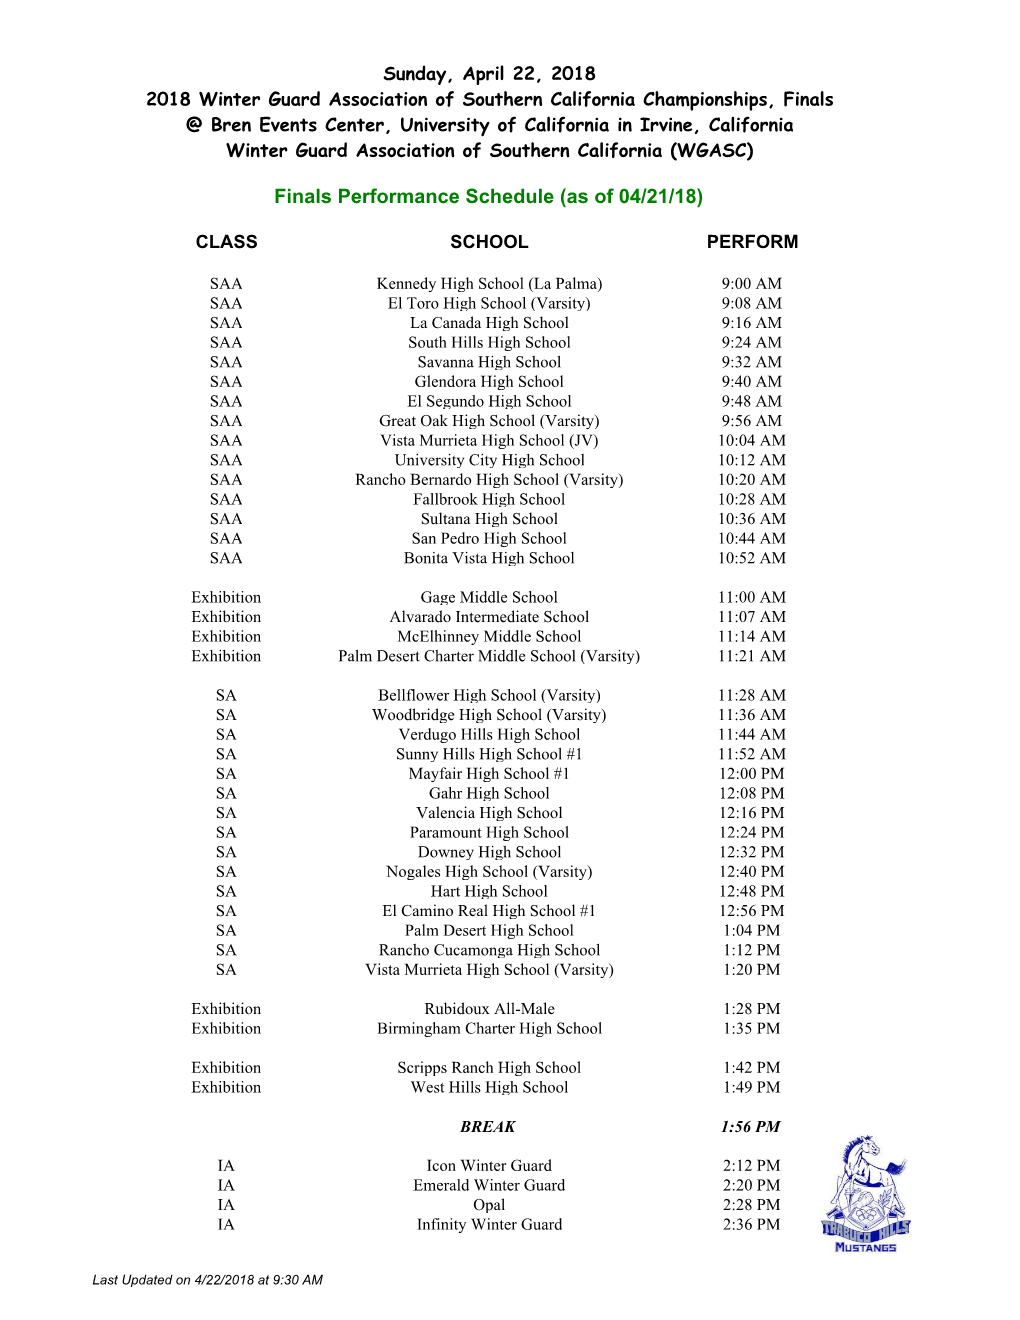 Finals Performance Schedule (As of 04/21/18)